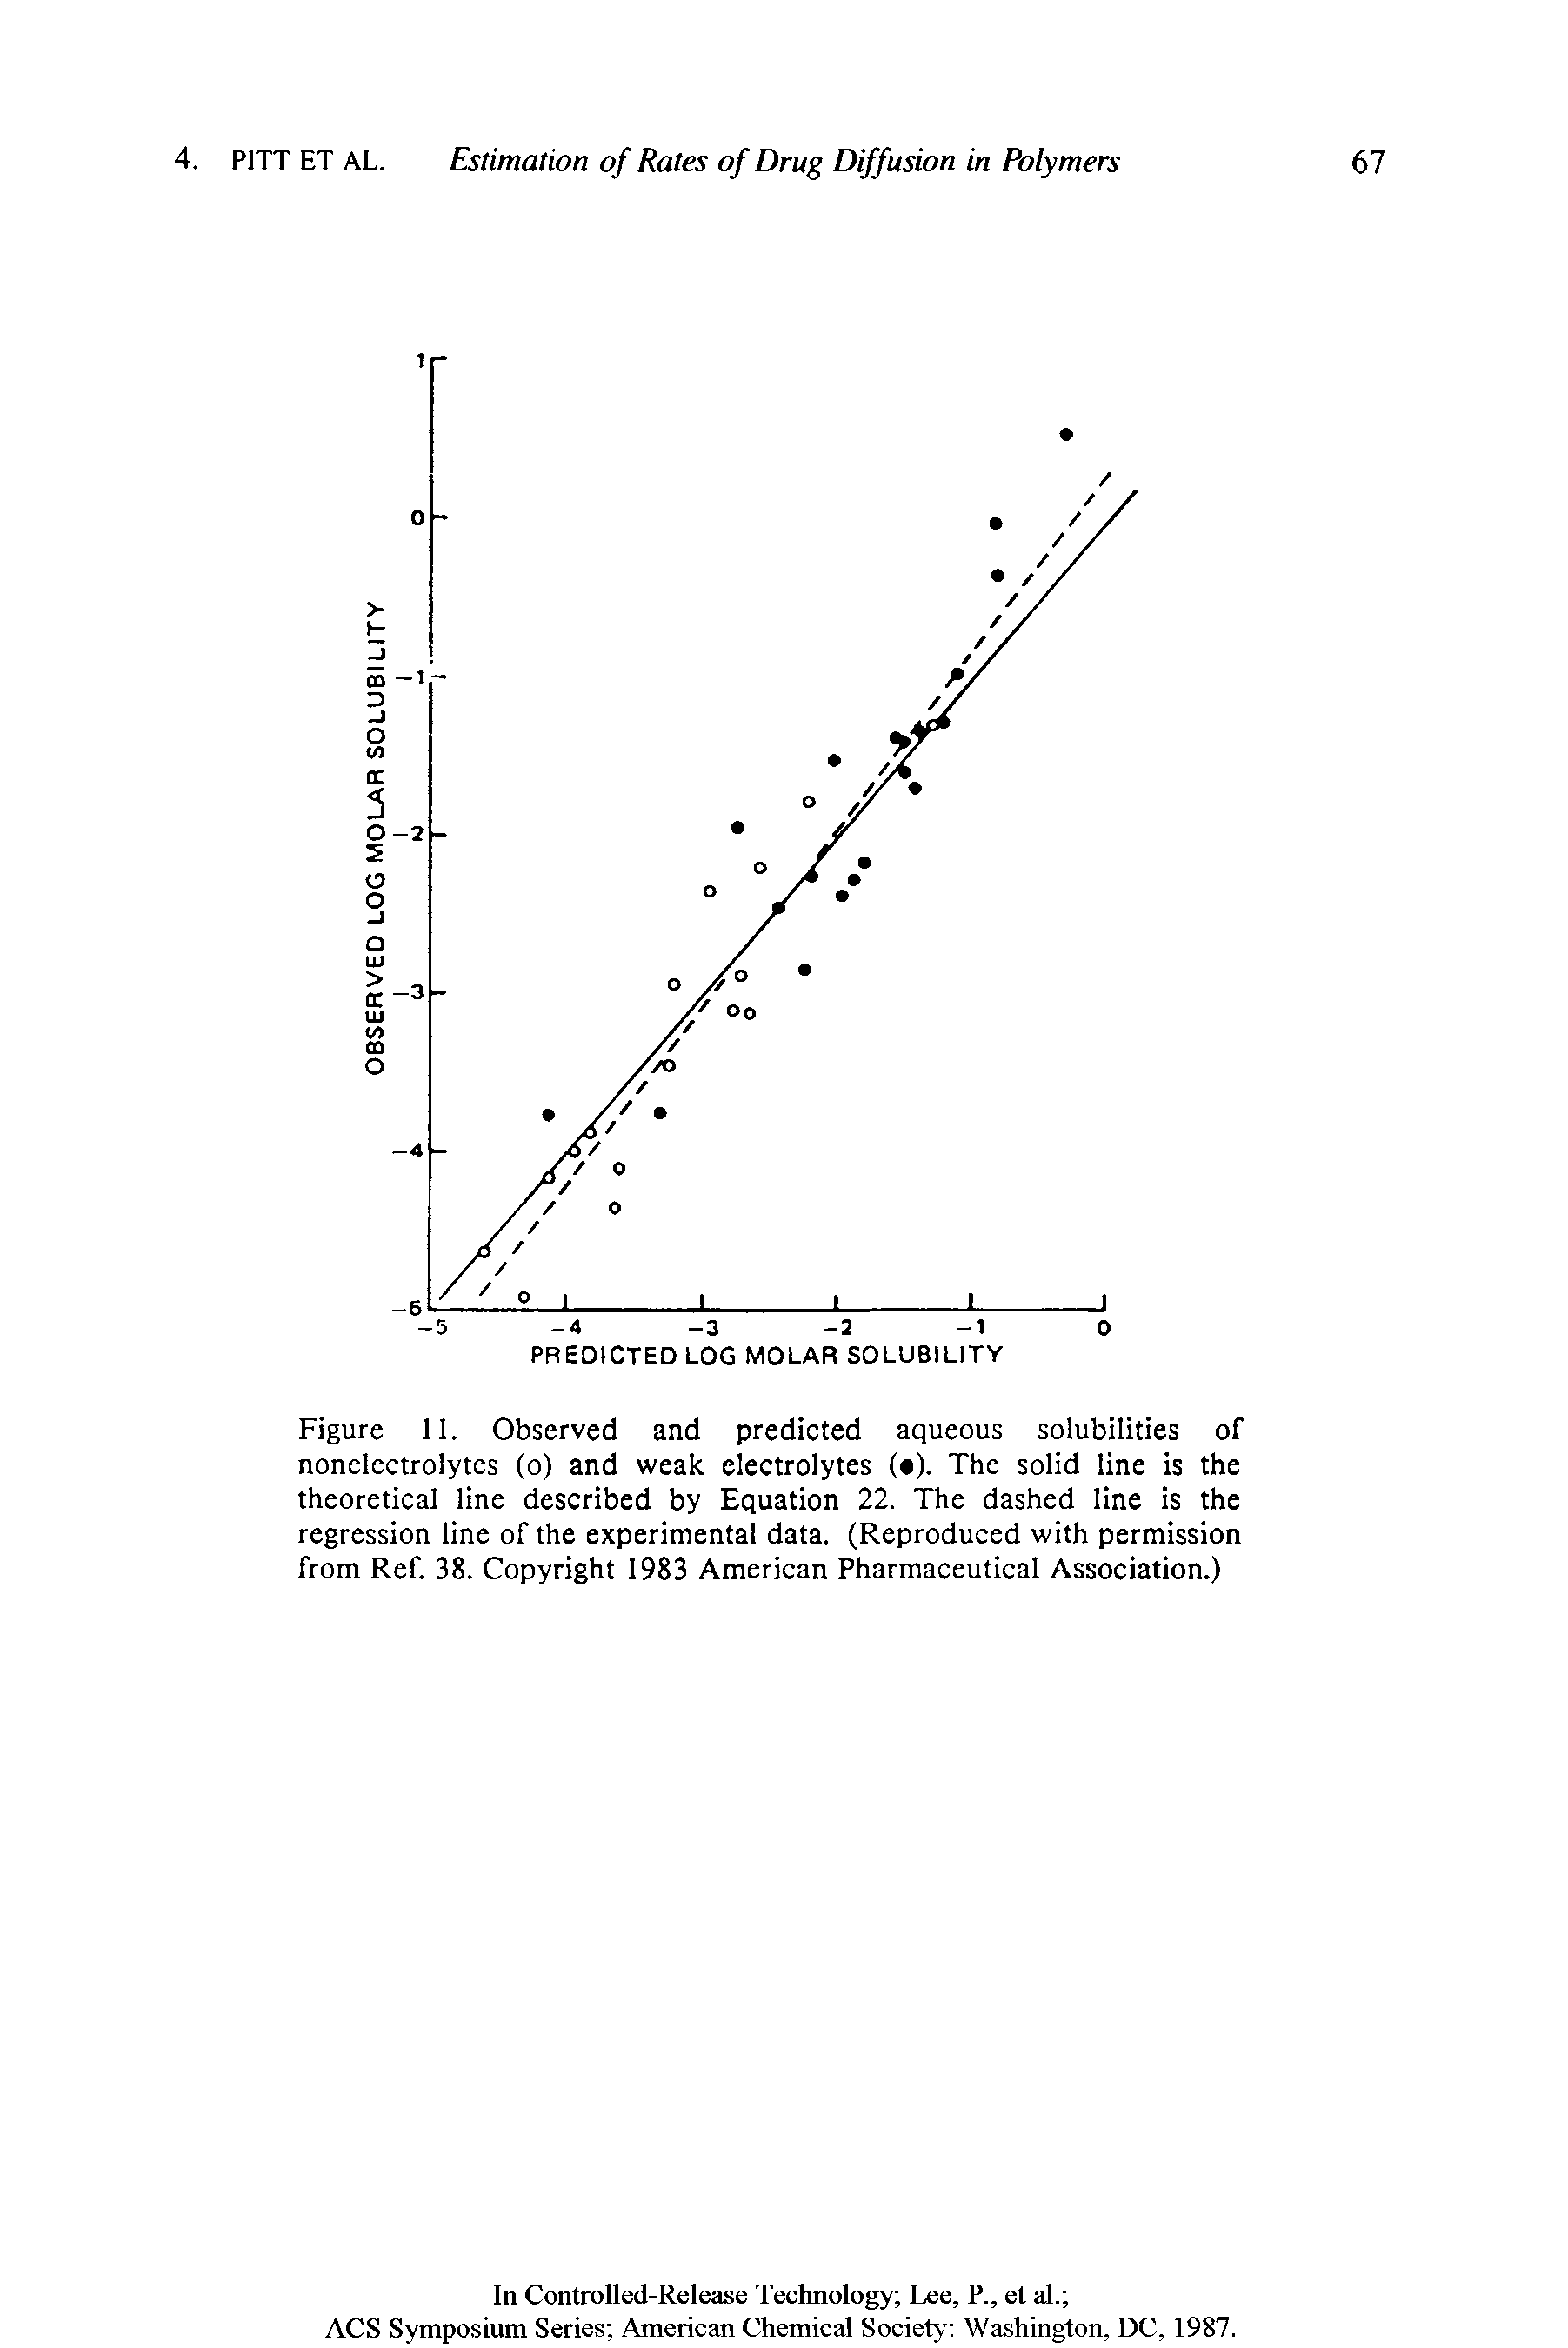 Figure 11. Observed and predicted aqueous solubilities of nonelectrolytes (o) and weak electrolytes ( ). The solid line is the theoretical line described by Equation 22. The dashed line is the regression line of the experimental data. (Reproduced with permission from Ref. 38. Copyright 1983 American Pharmaceutical Association.)...